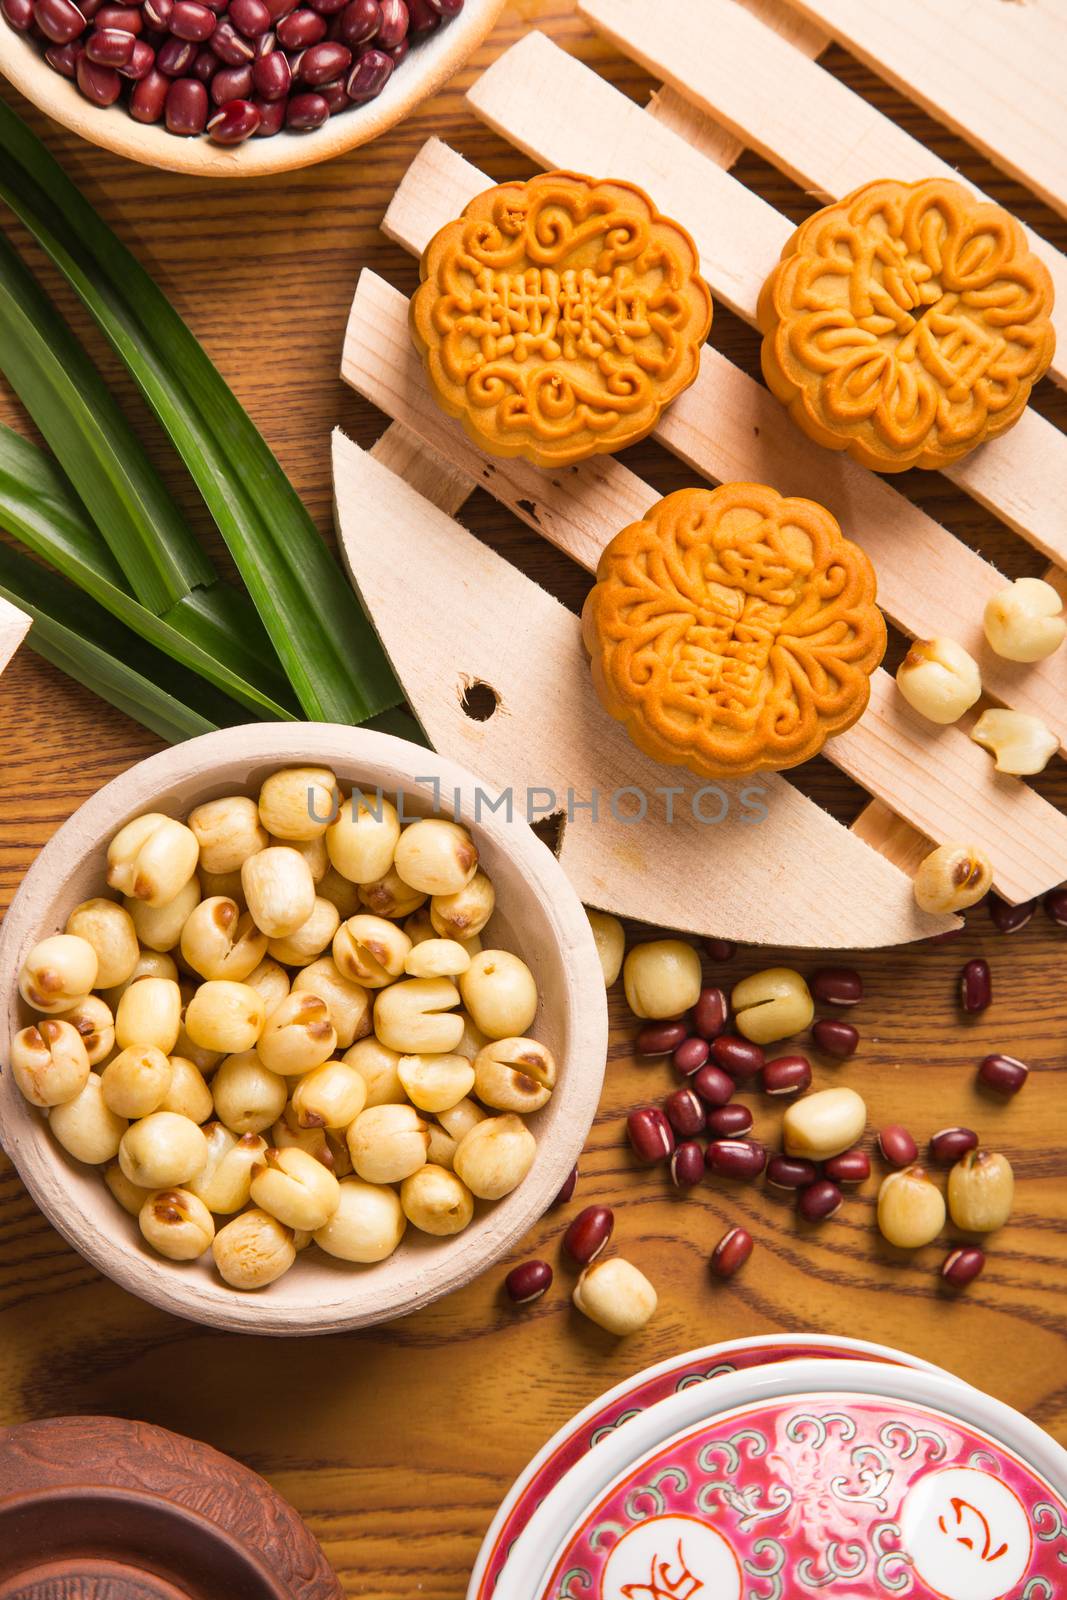 Traditional mooncakes on table setting with ingredients and teapot. Translation for those chinese words is red bean, lotus paste and jade paste.